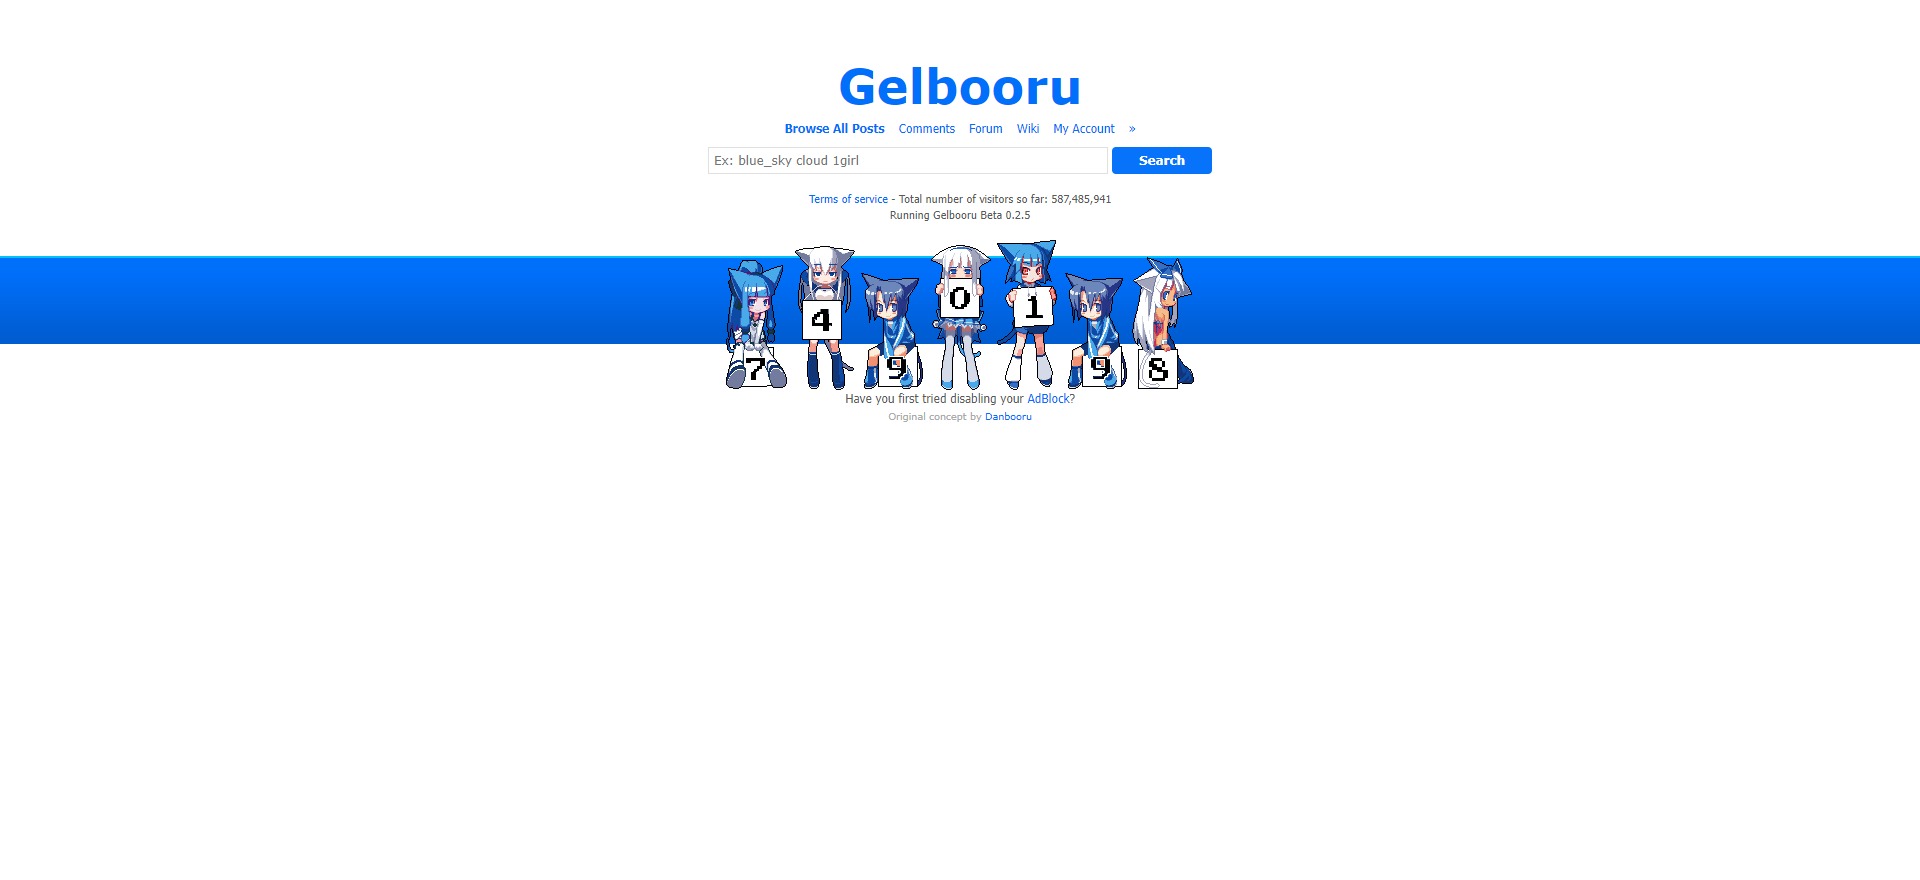 Gelbooru: My opinion and everything you need to know